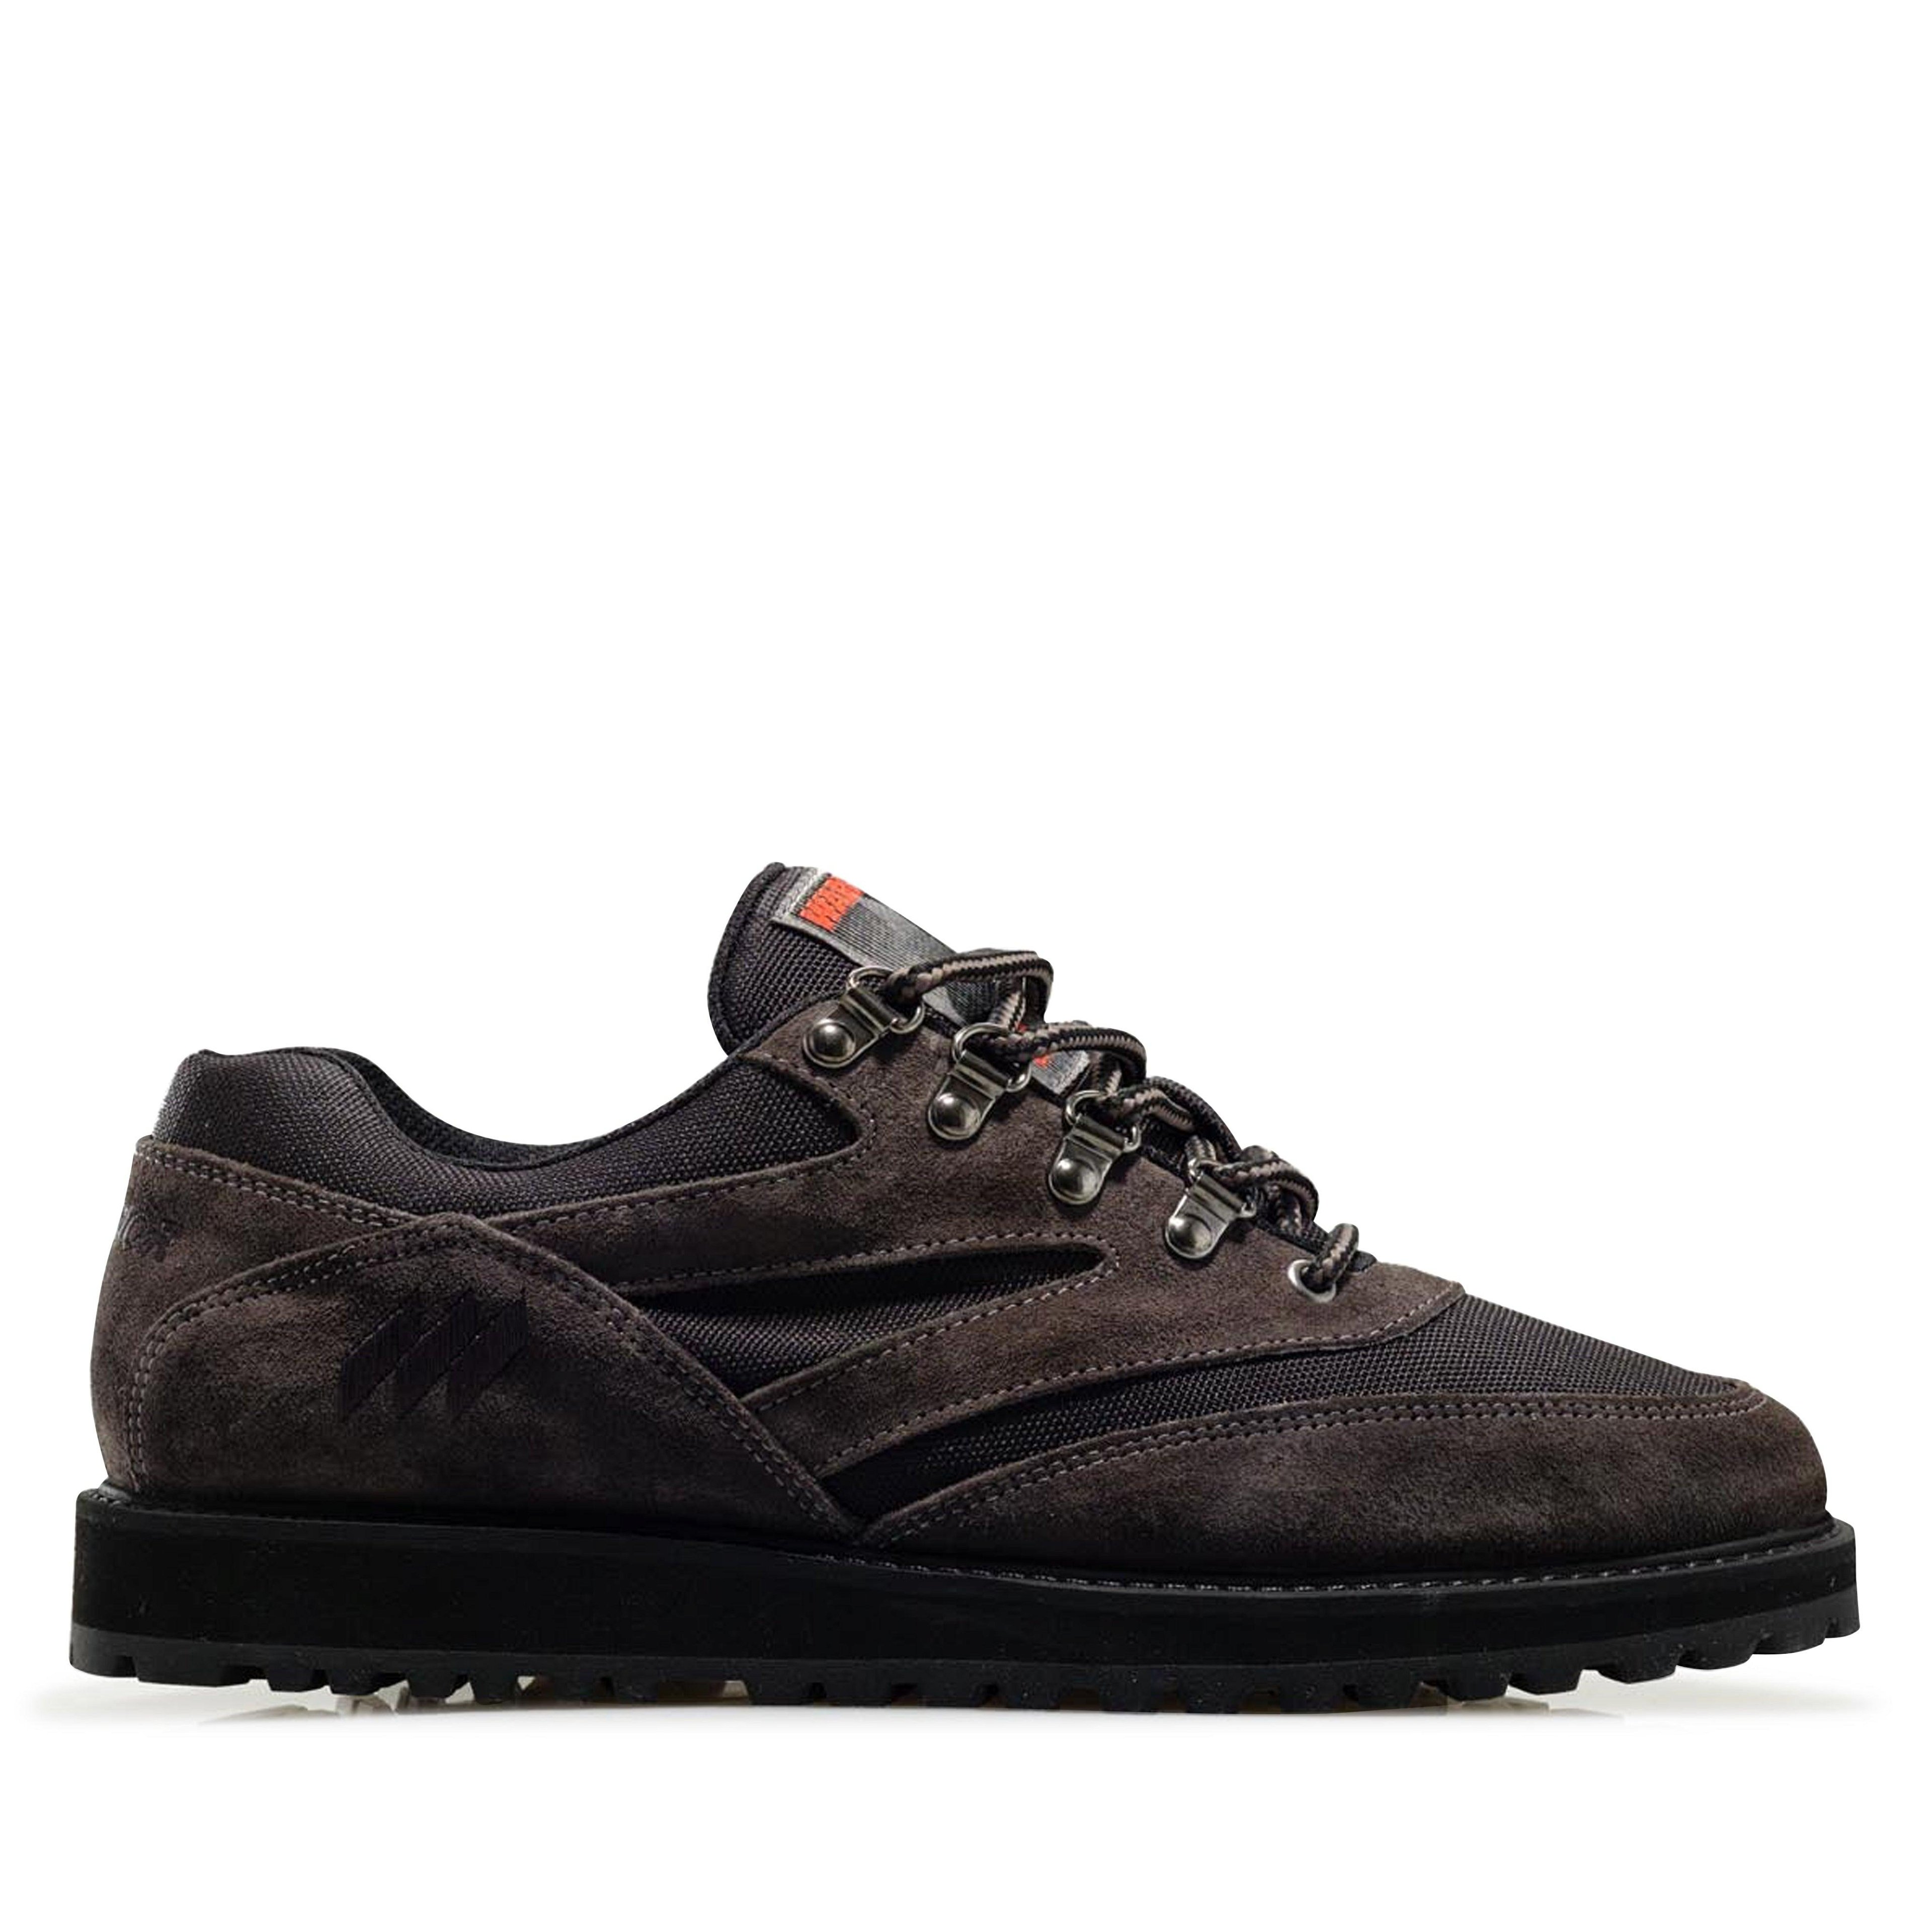 Warrior - Matterhorn Shoes - (Black/Antracite) by WARRIOR SHOES